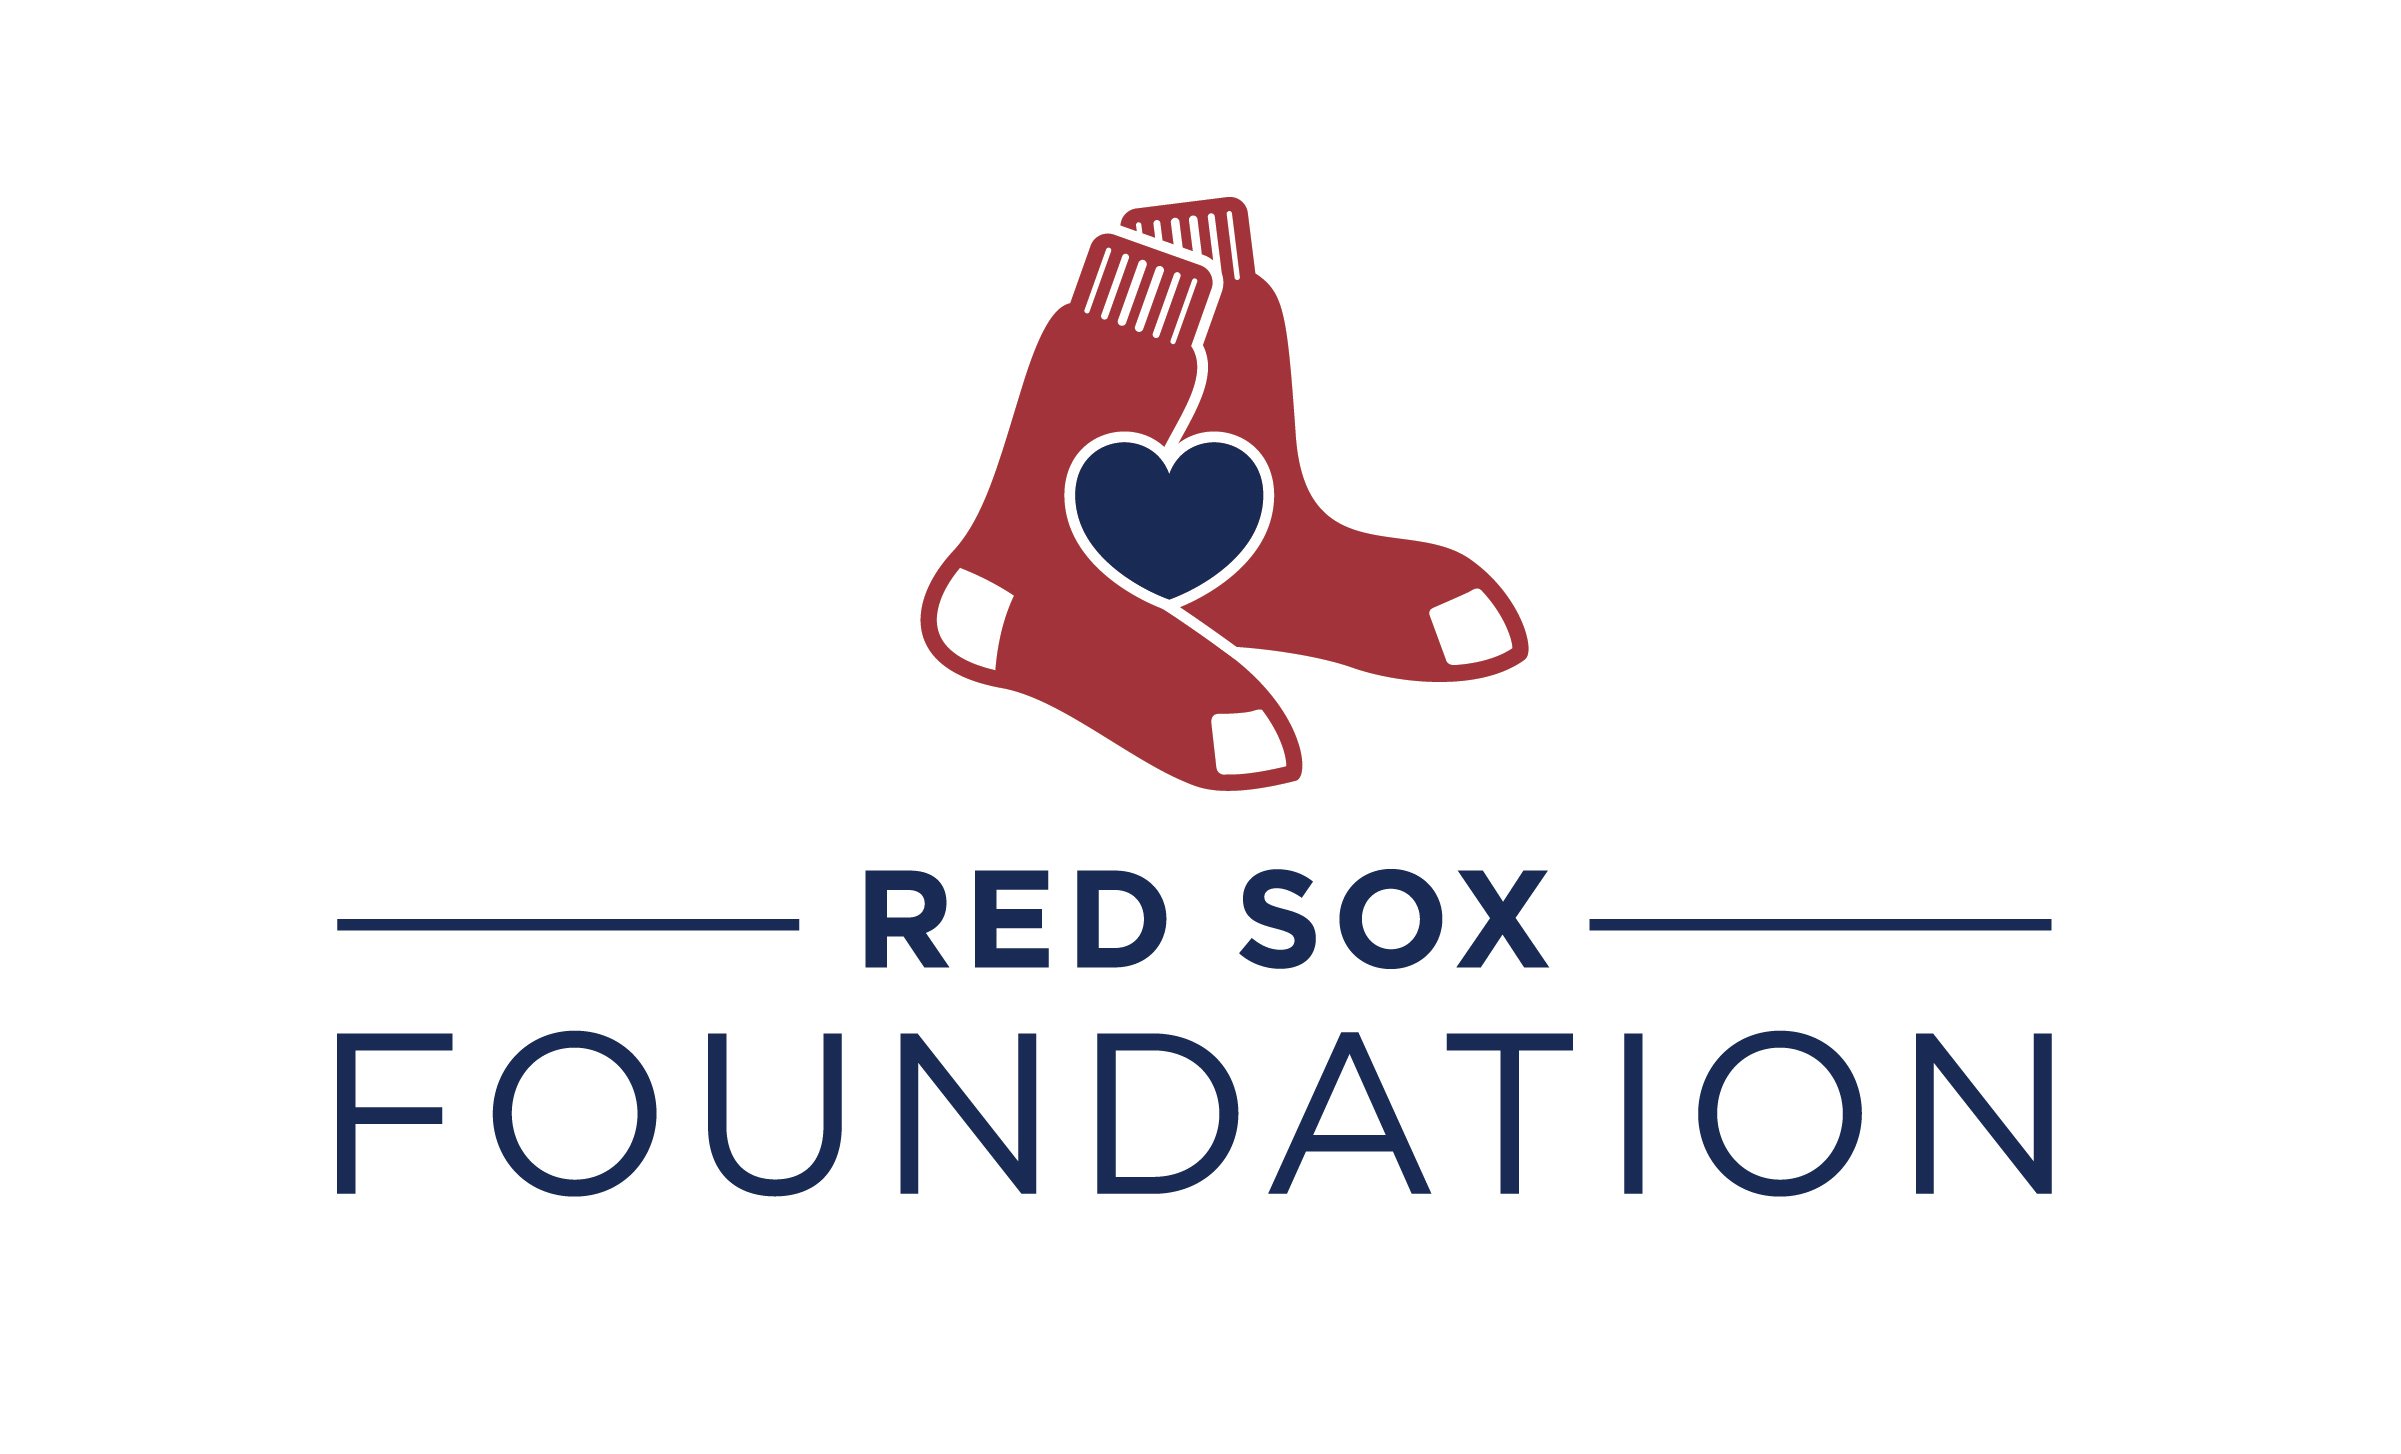 Red Sox Foundation Primary.jpg